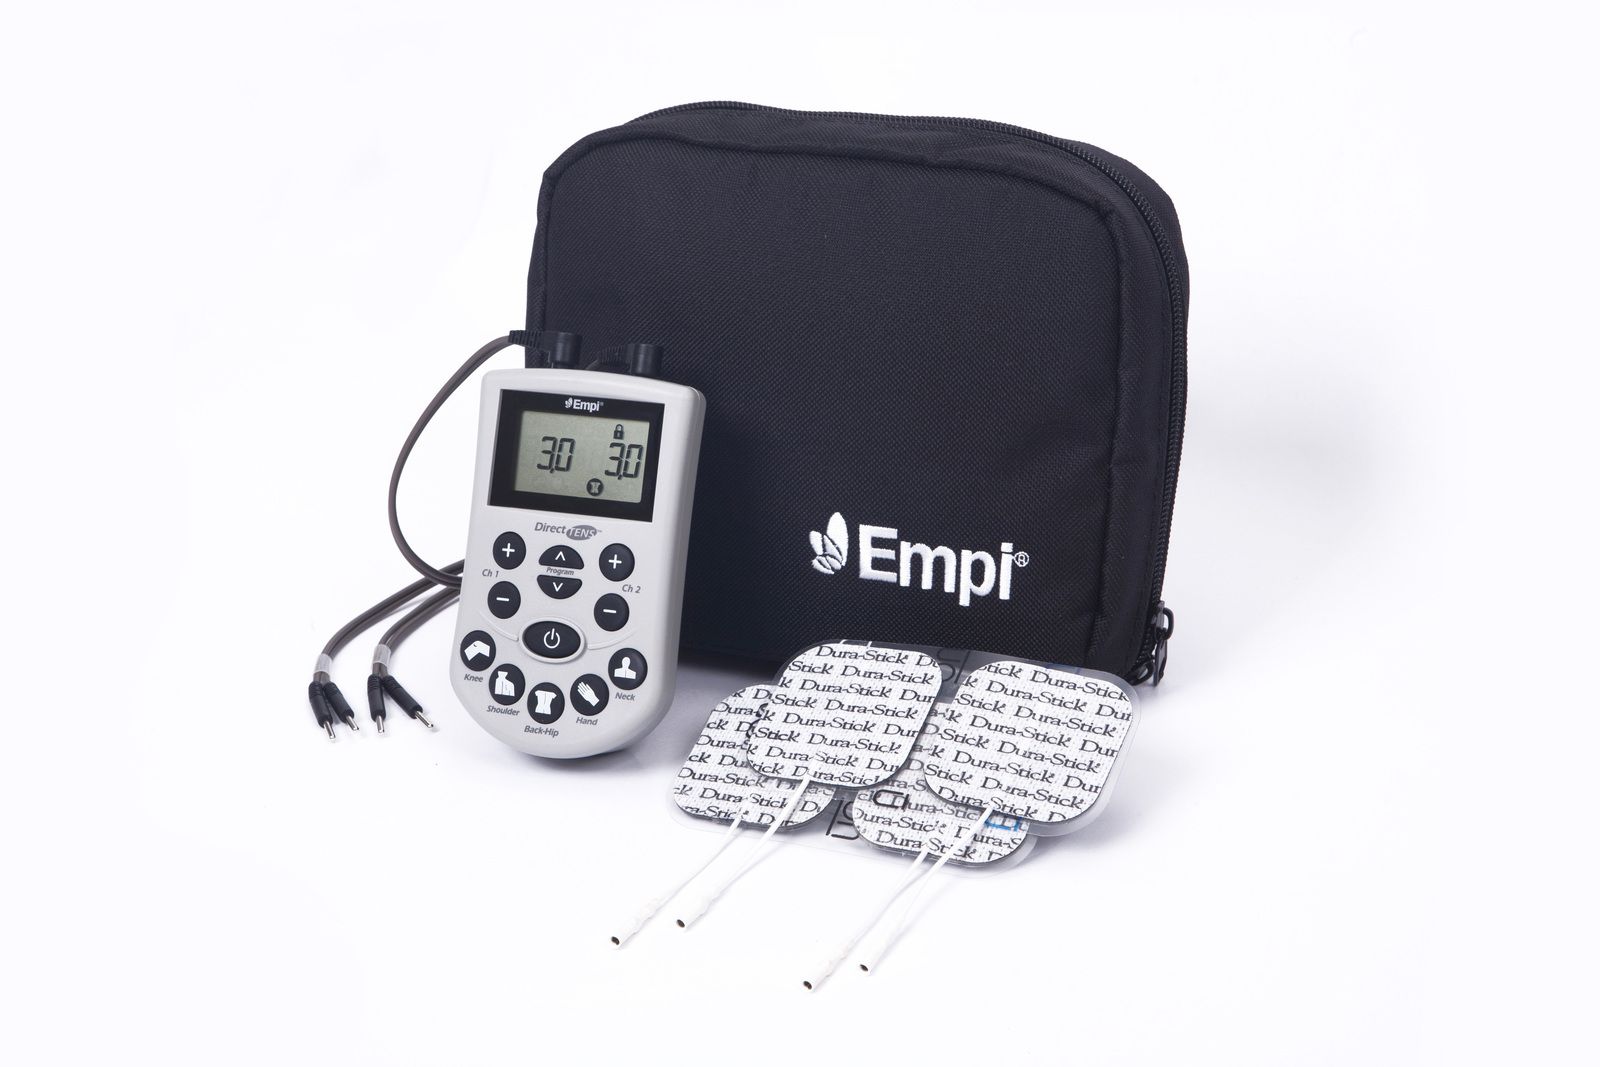 Compex Fit 1.0 with TENS/EMS - Bundle Pack – Physio supplies canada